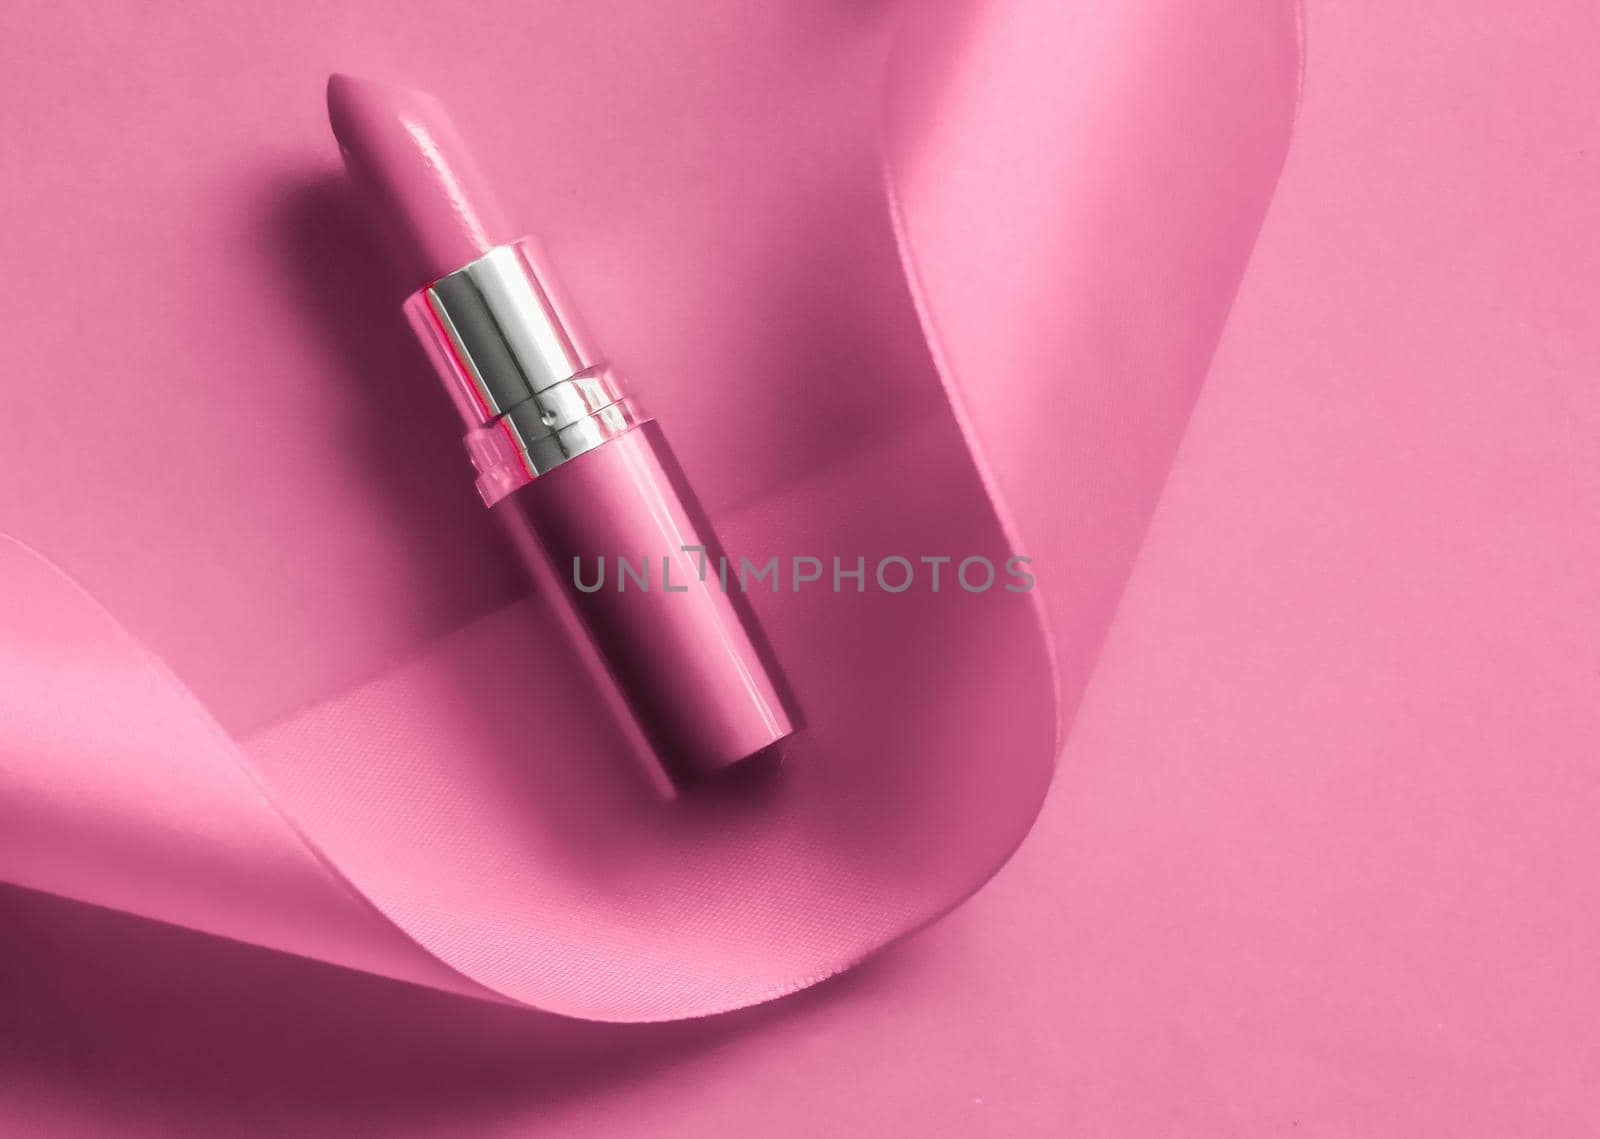 Cosmetic branding, glamour lip gloss and shopping sale concept - Luxury lipstick and silk ribbon on pink holiday background, make-up and cosmetics flatlay for beauty brand product design